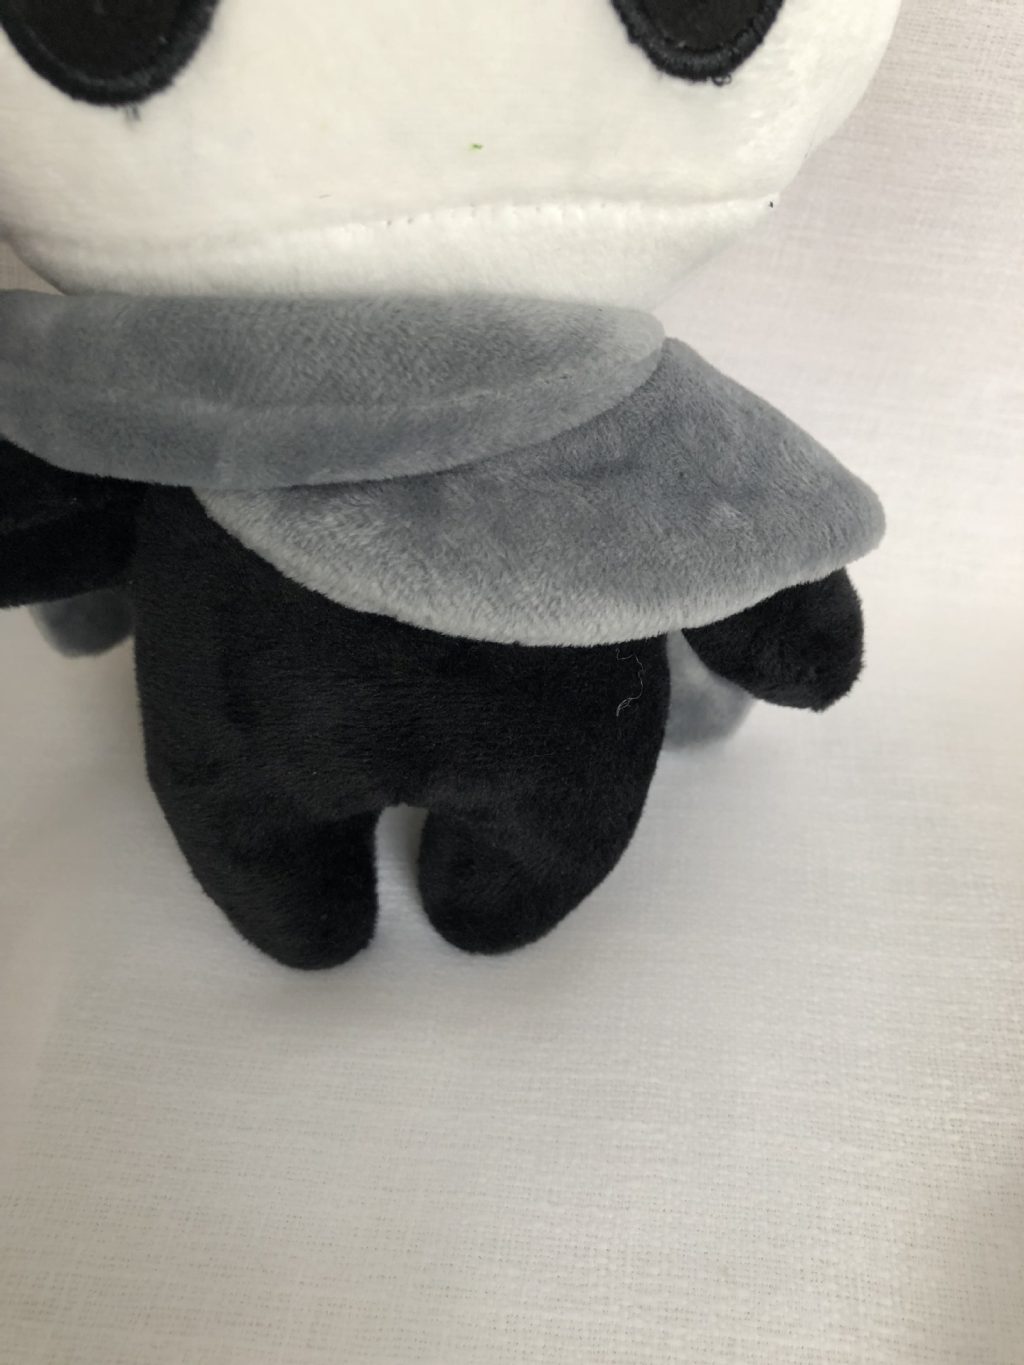 30cm Hot Game Hollow Knight Plush Toys Figure Ghost Plush Stuffed Animals Doll Brinquedos Kids Toys 3 - Hollow Knight Store